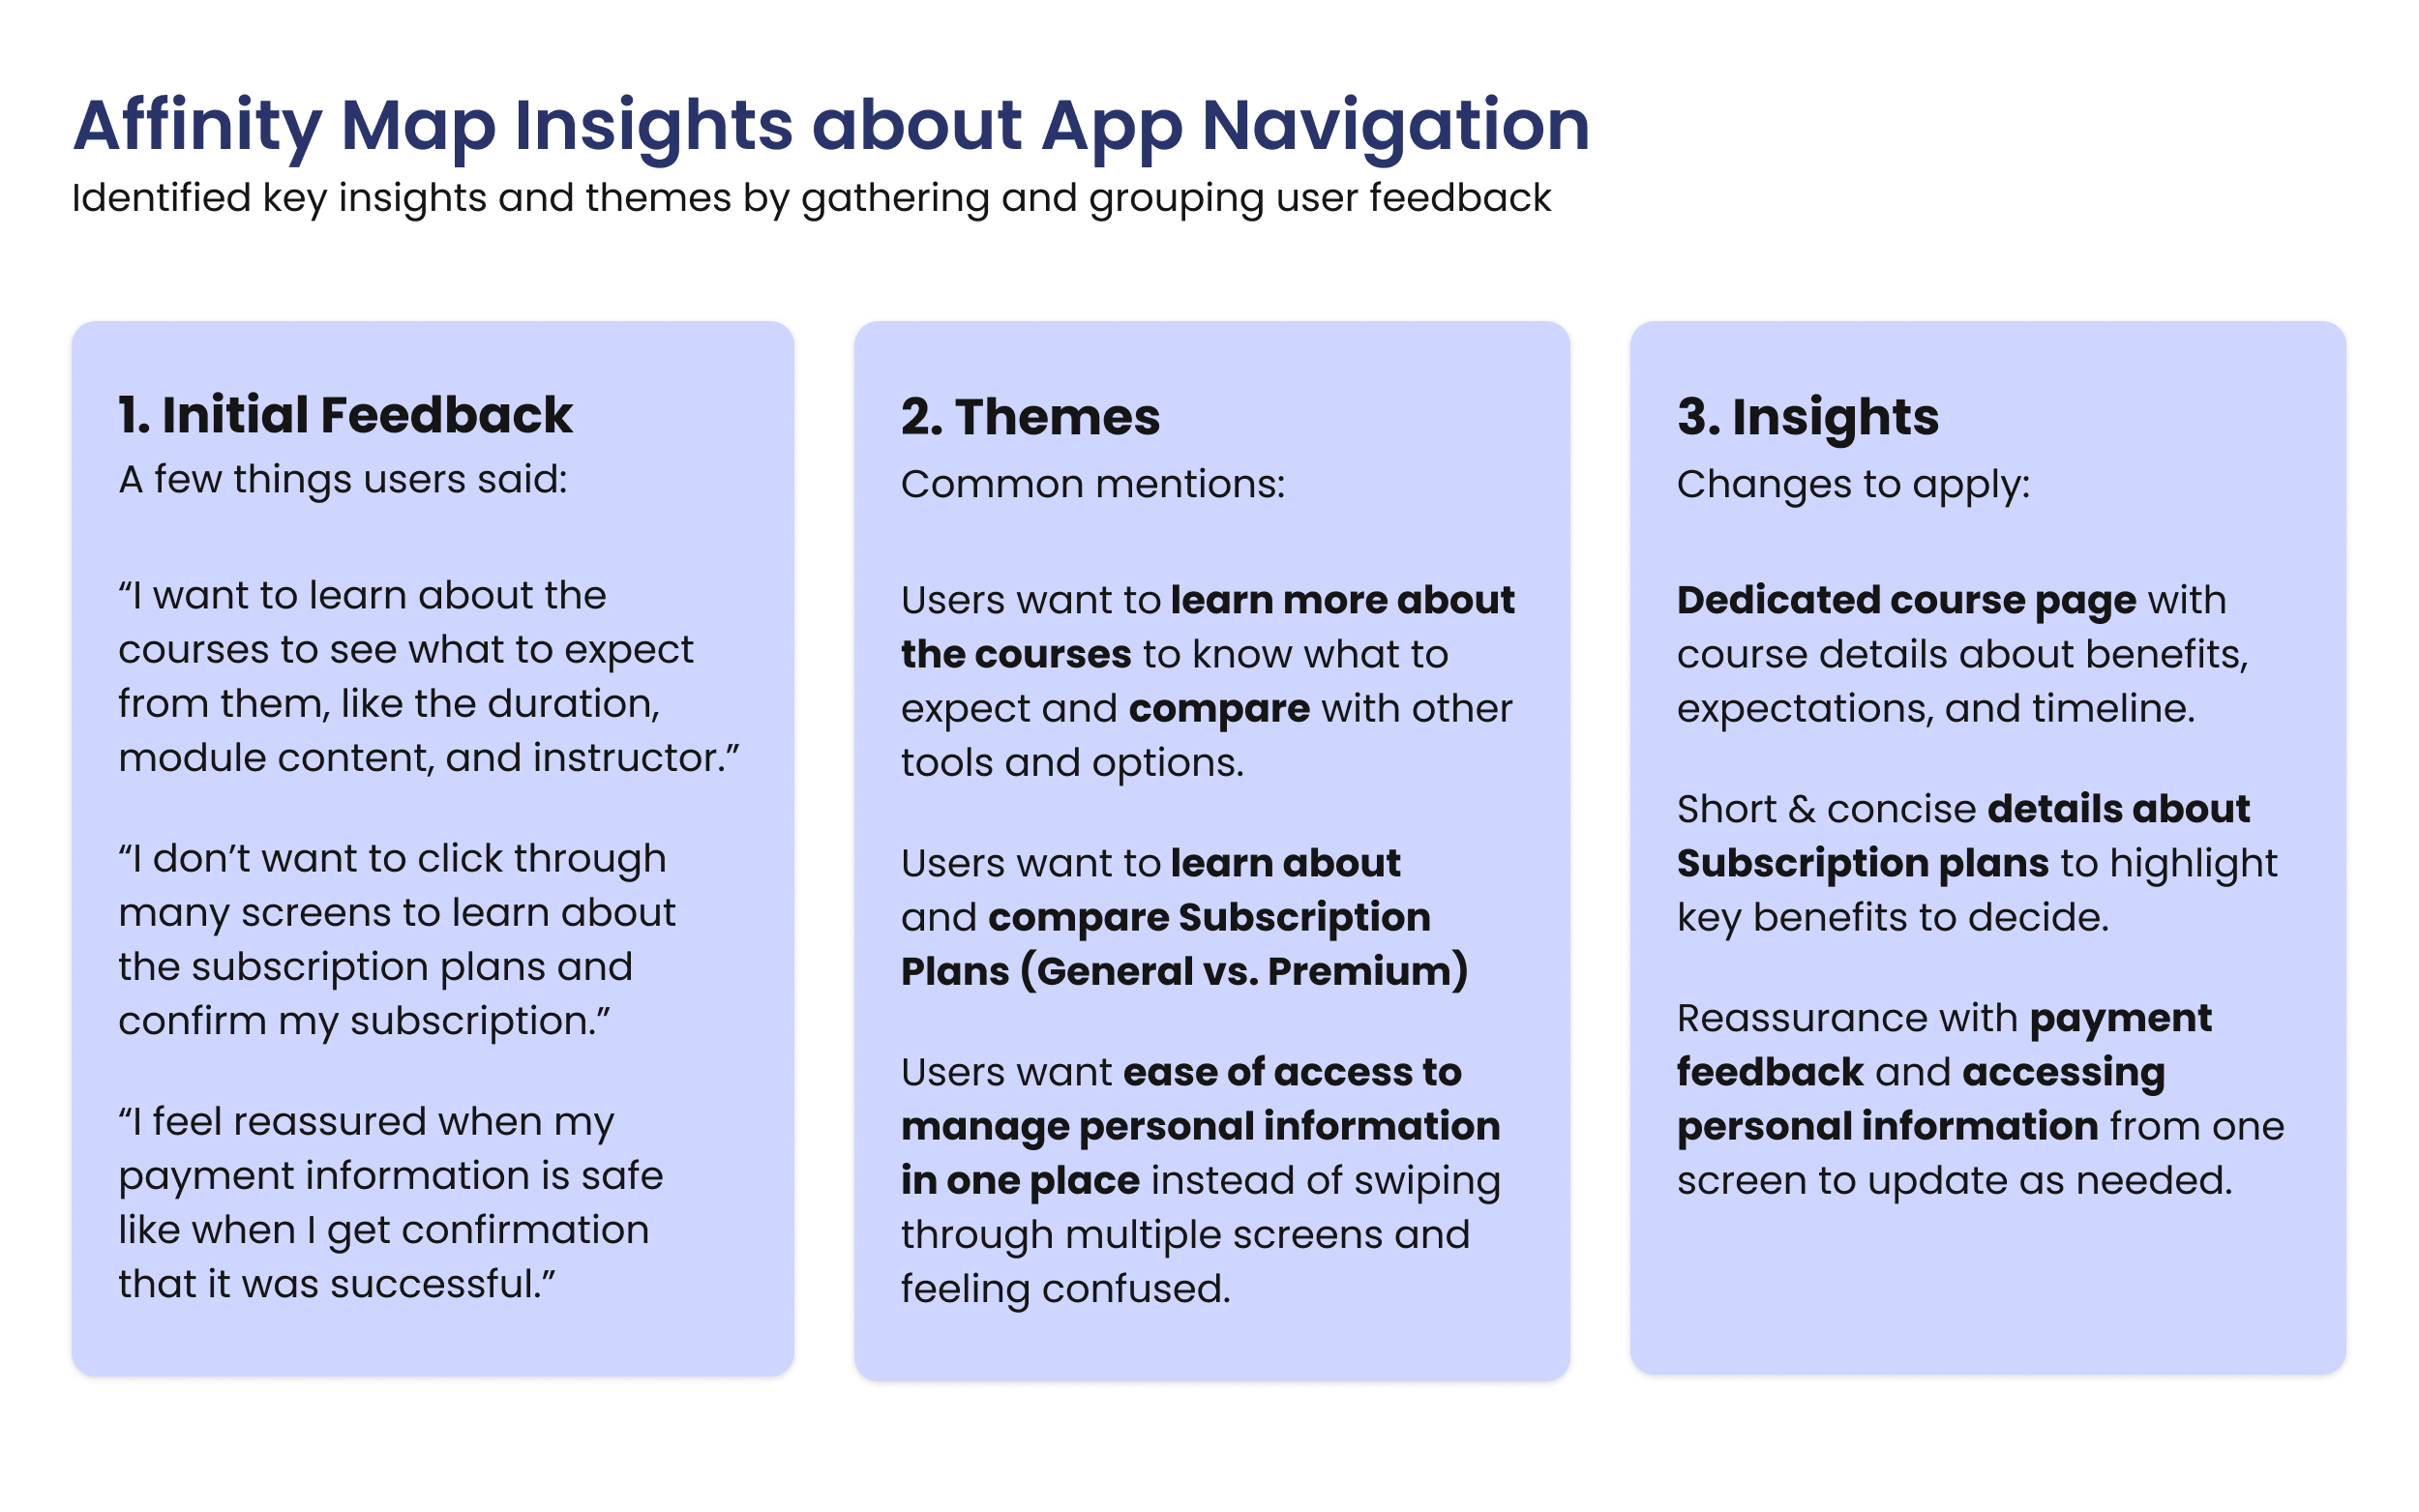 Three groups of list items highlighting the initial feedback, themes, and insights from Affinity Mapping the App Navigation user feedback